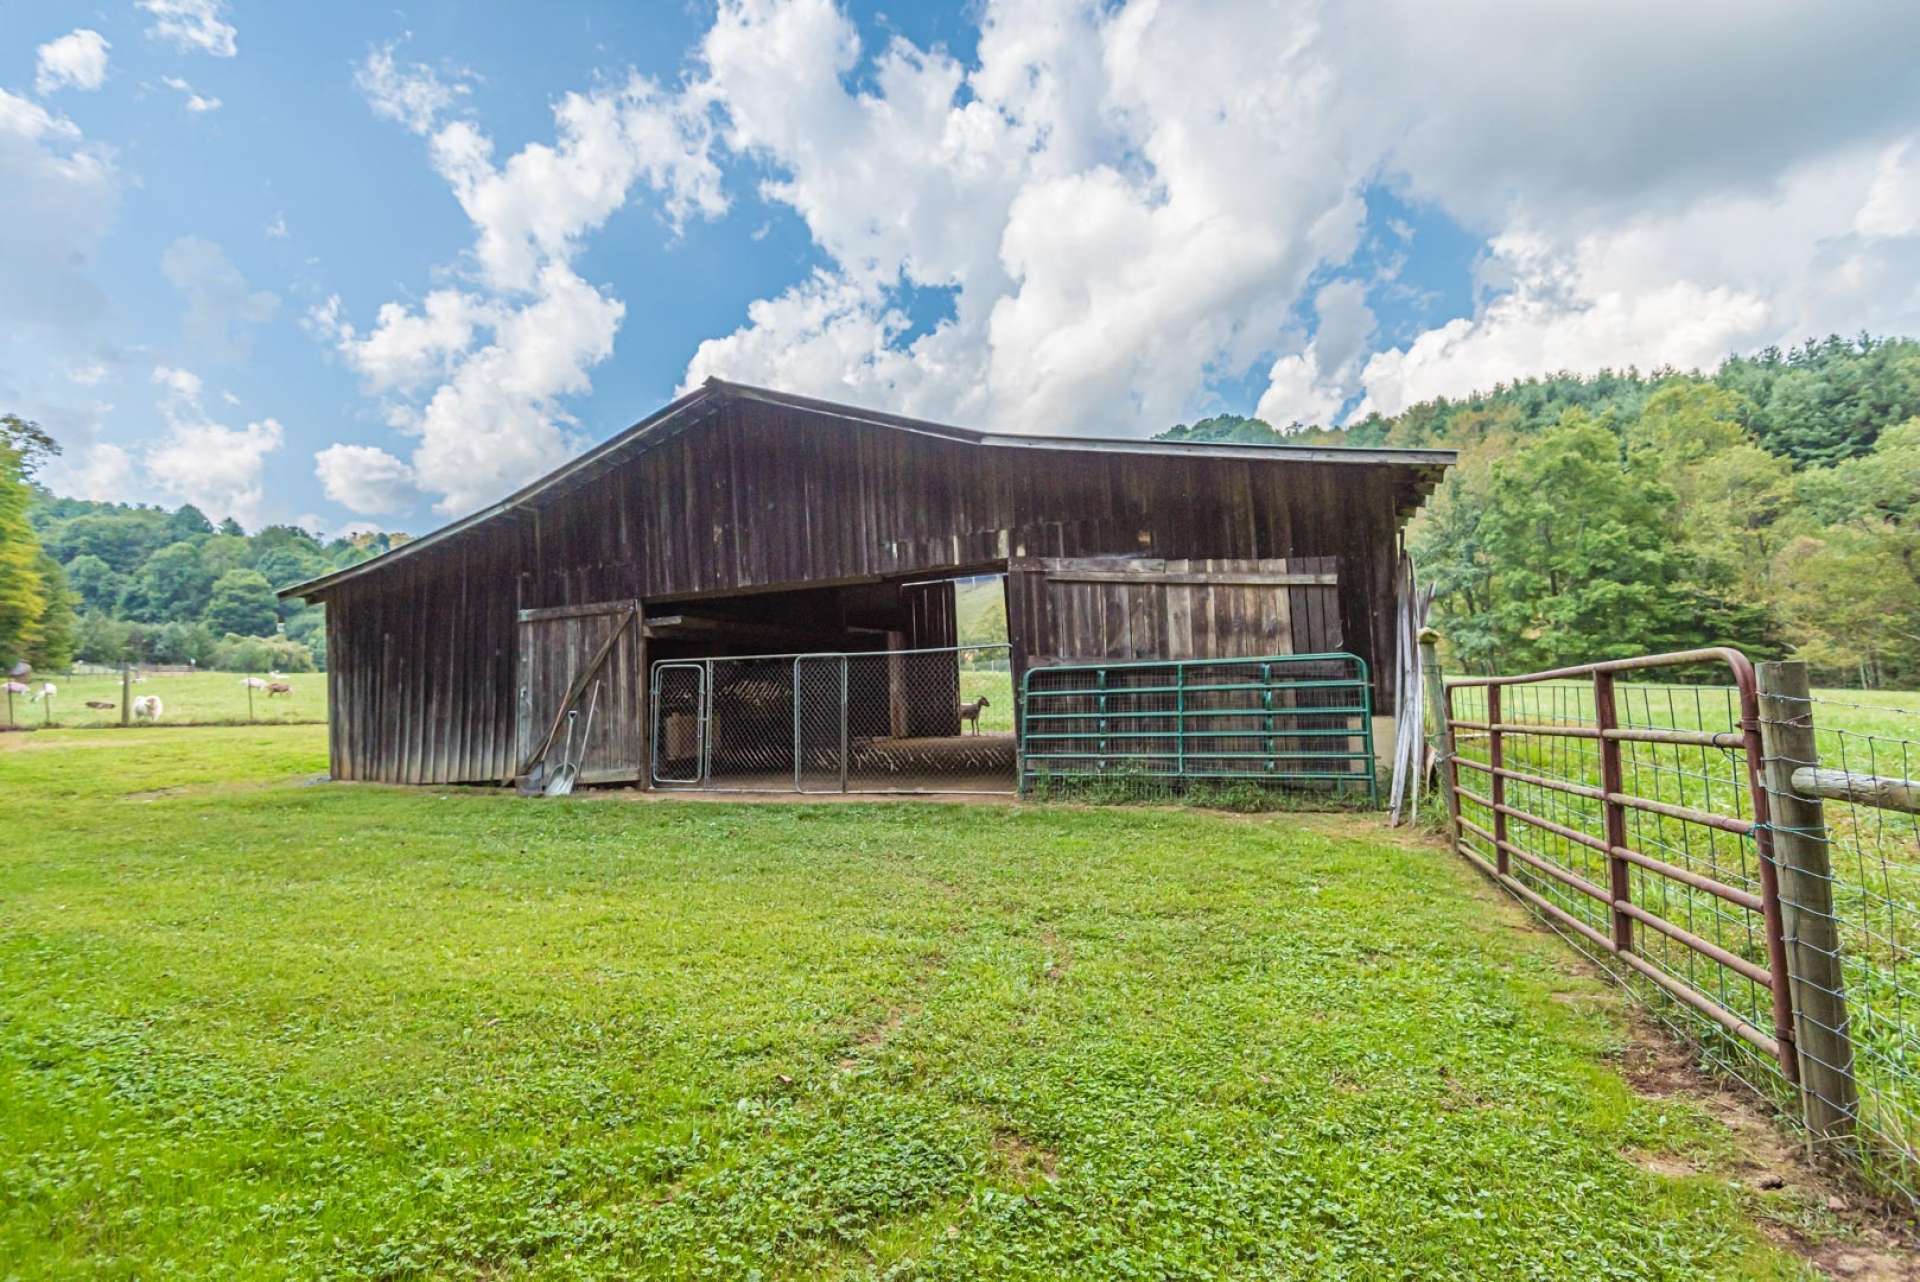 A well built barn with paddocks will accommodate livestock and equipment.